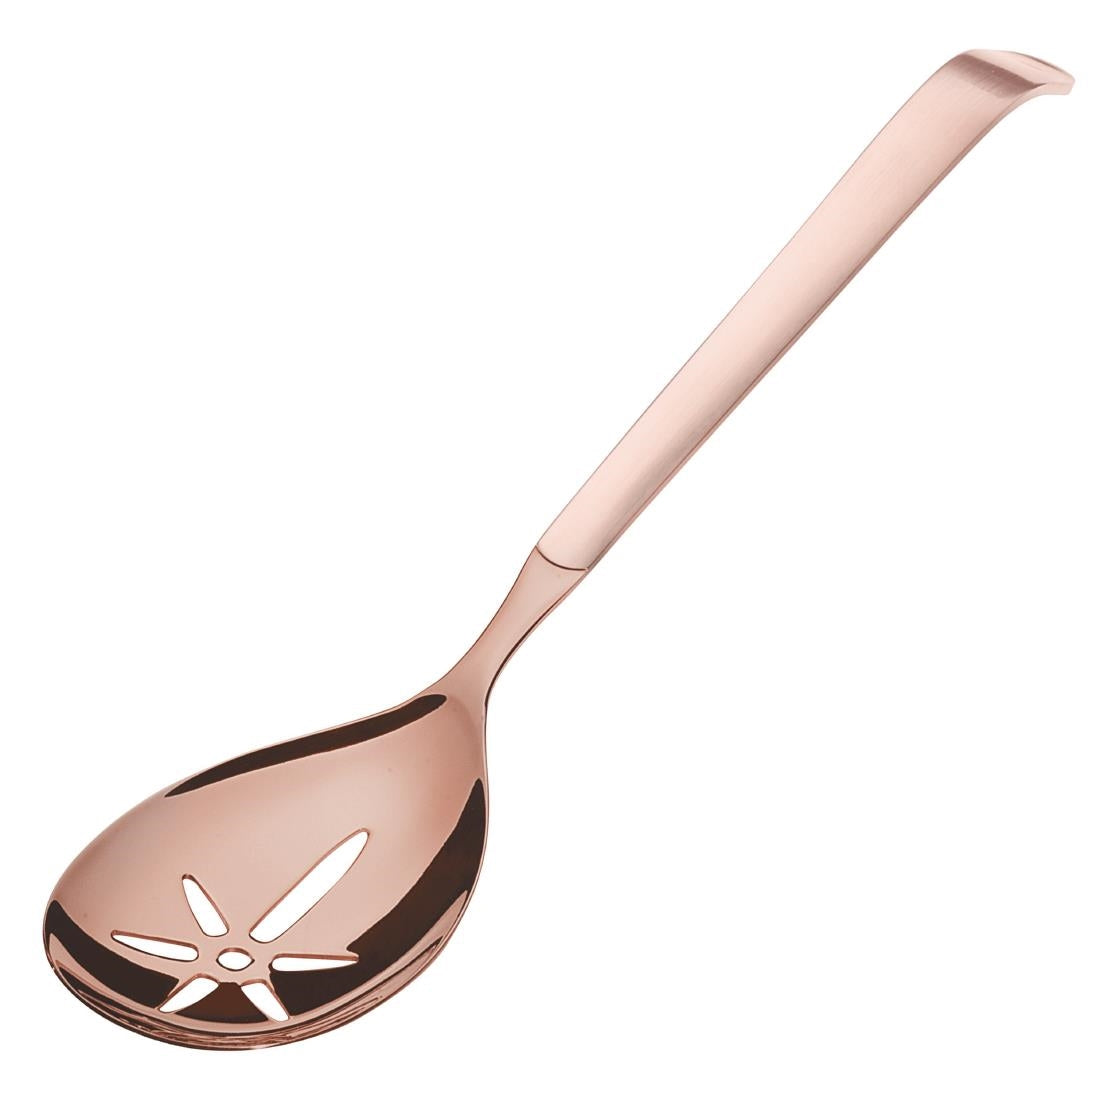 DX647 Amefa Buffet Slotted Serving Spoon Copper (Pack of 6)